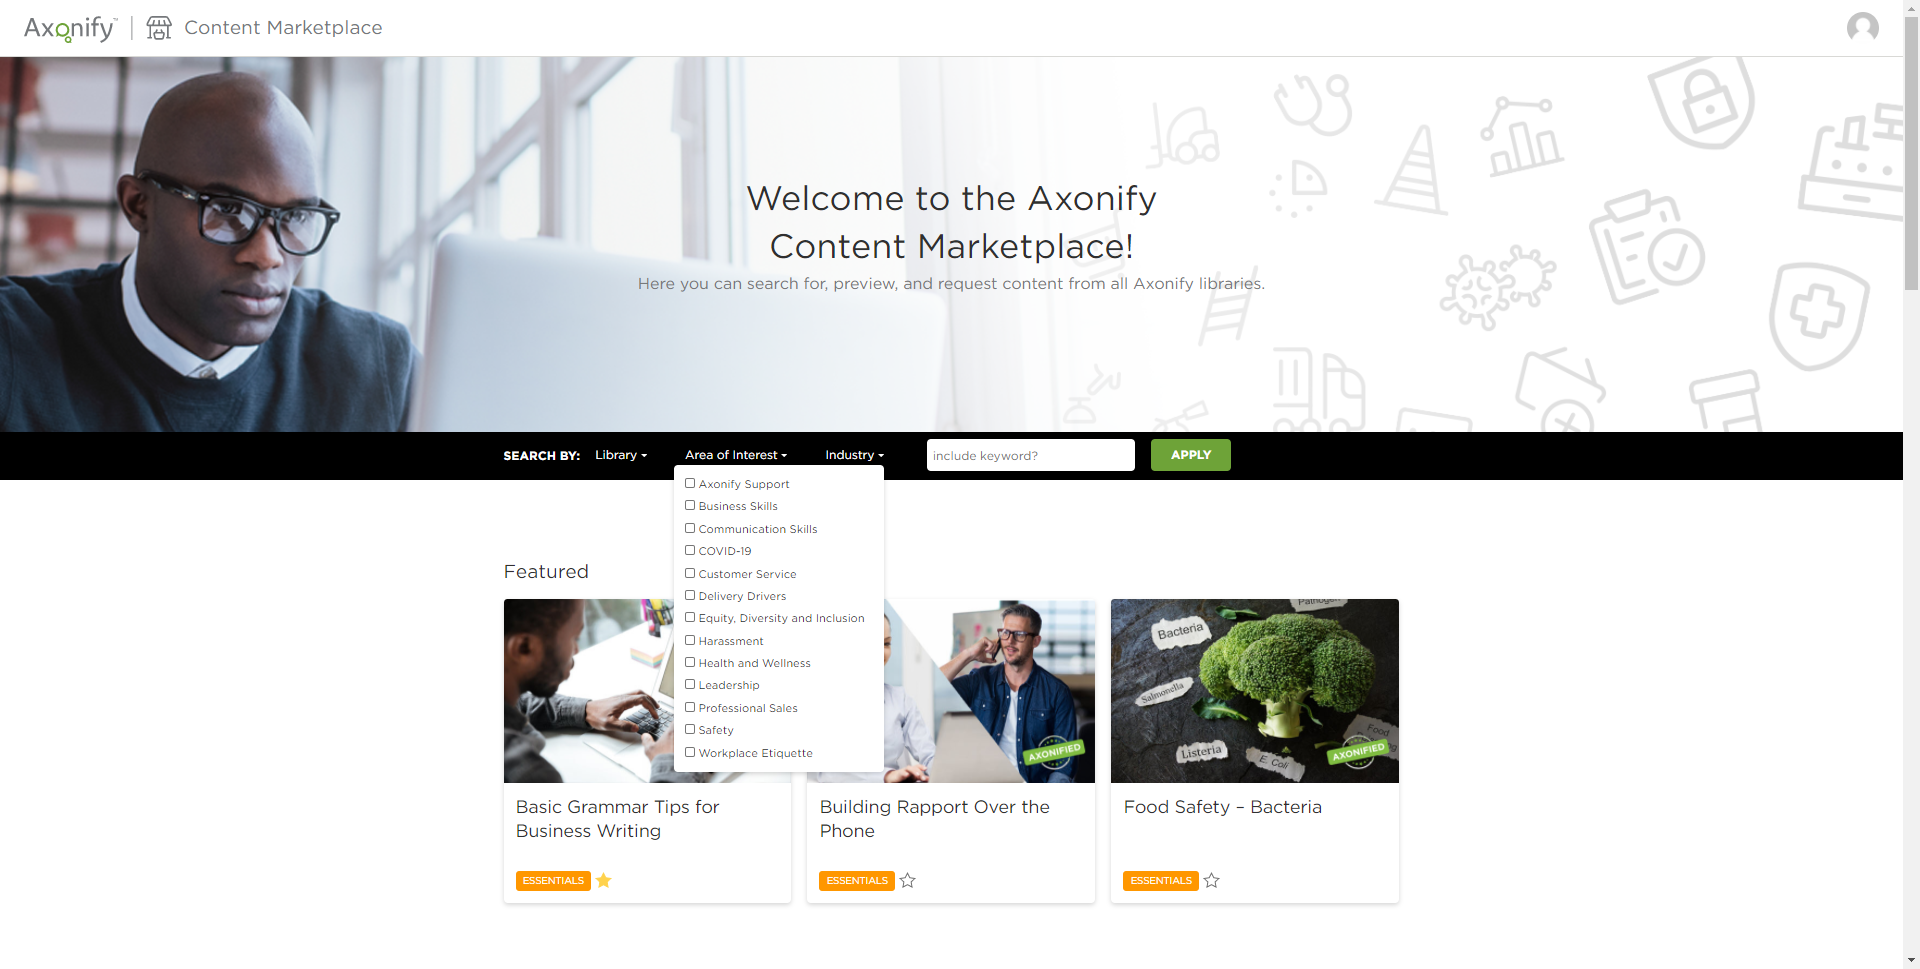 Axonify Software - Content Marketplace is where you can go to find topics and modules you need to design your training paths. With over 500+ topics, you’ll have lots to choose from.